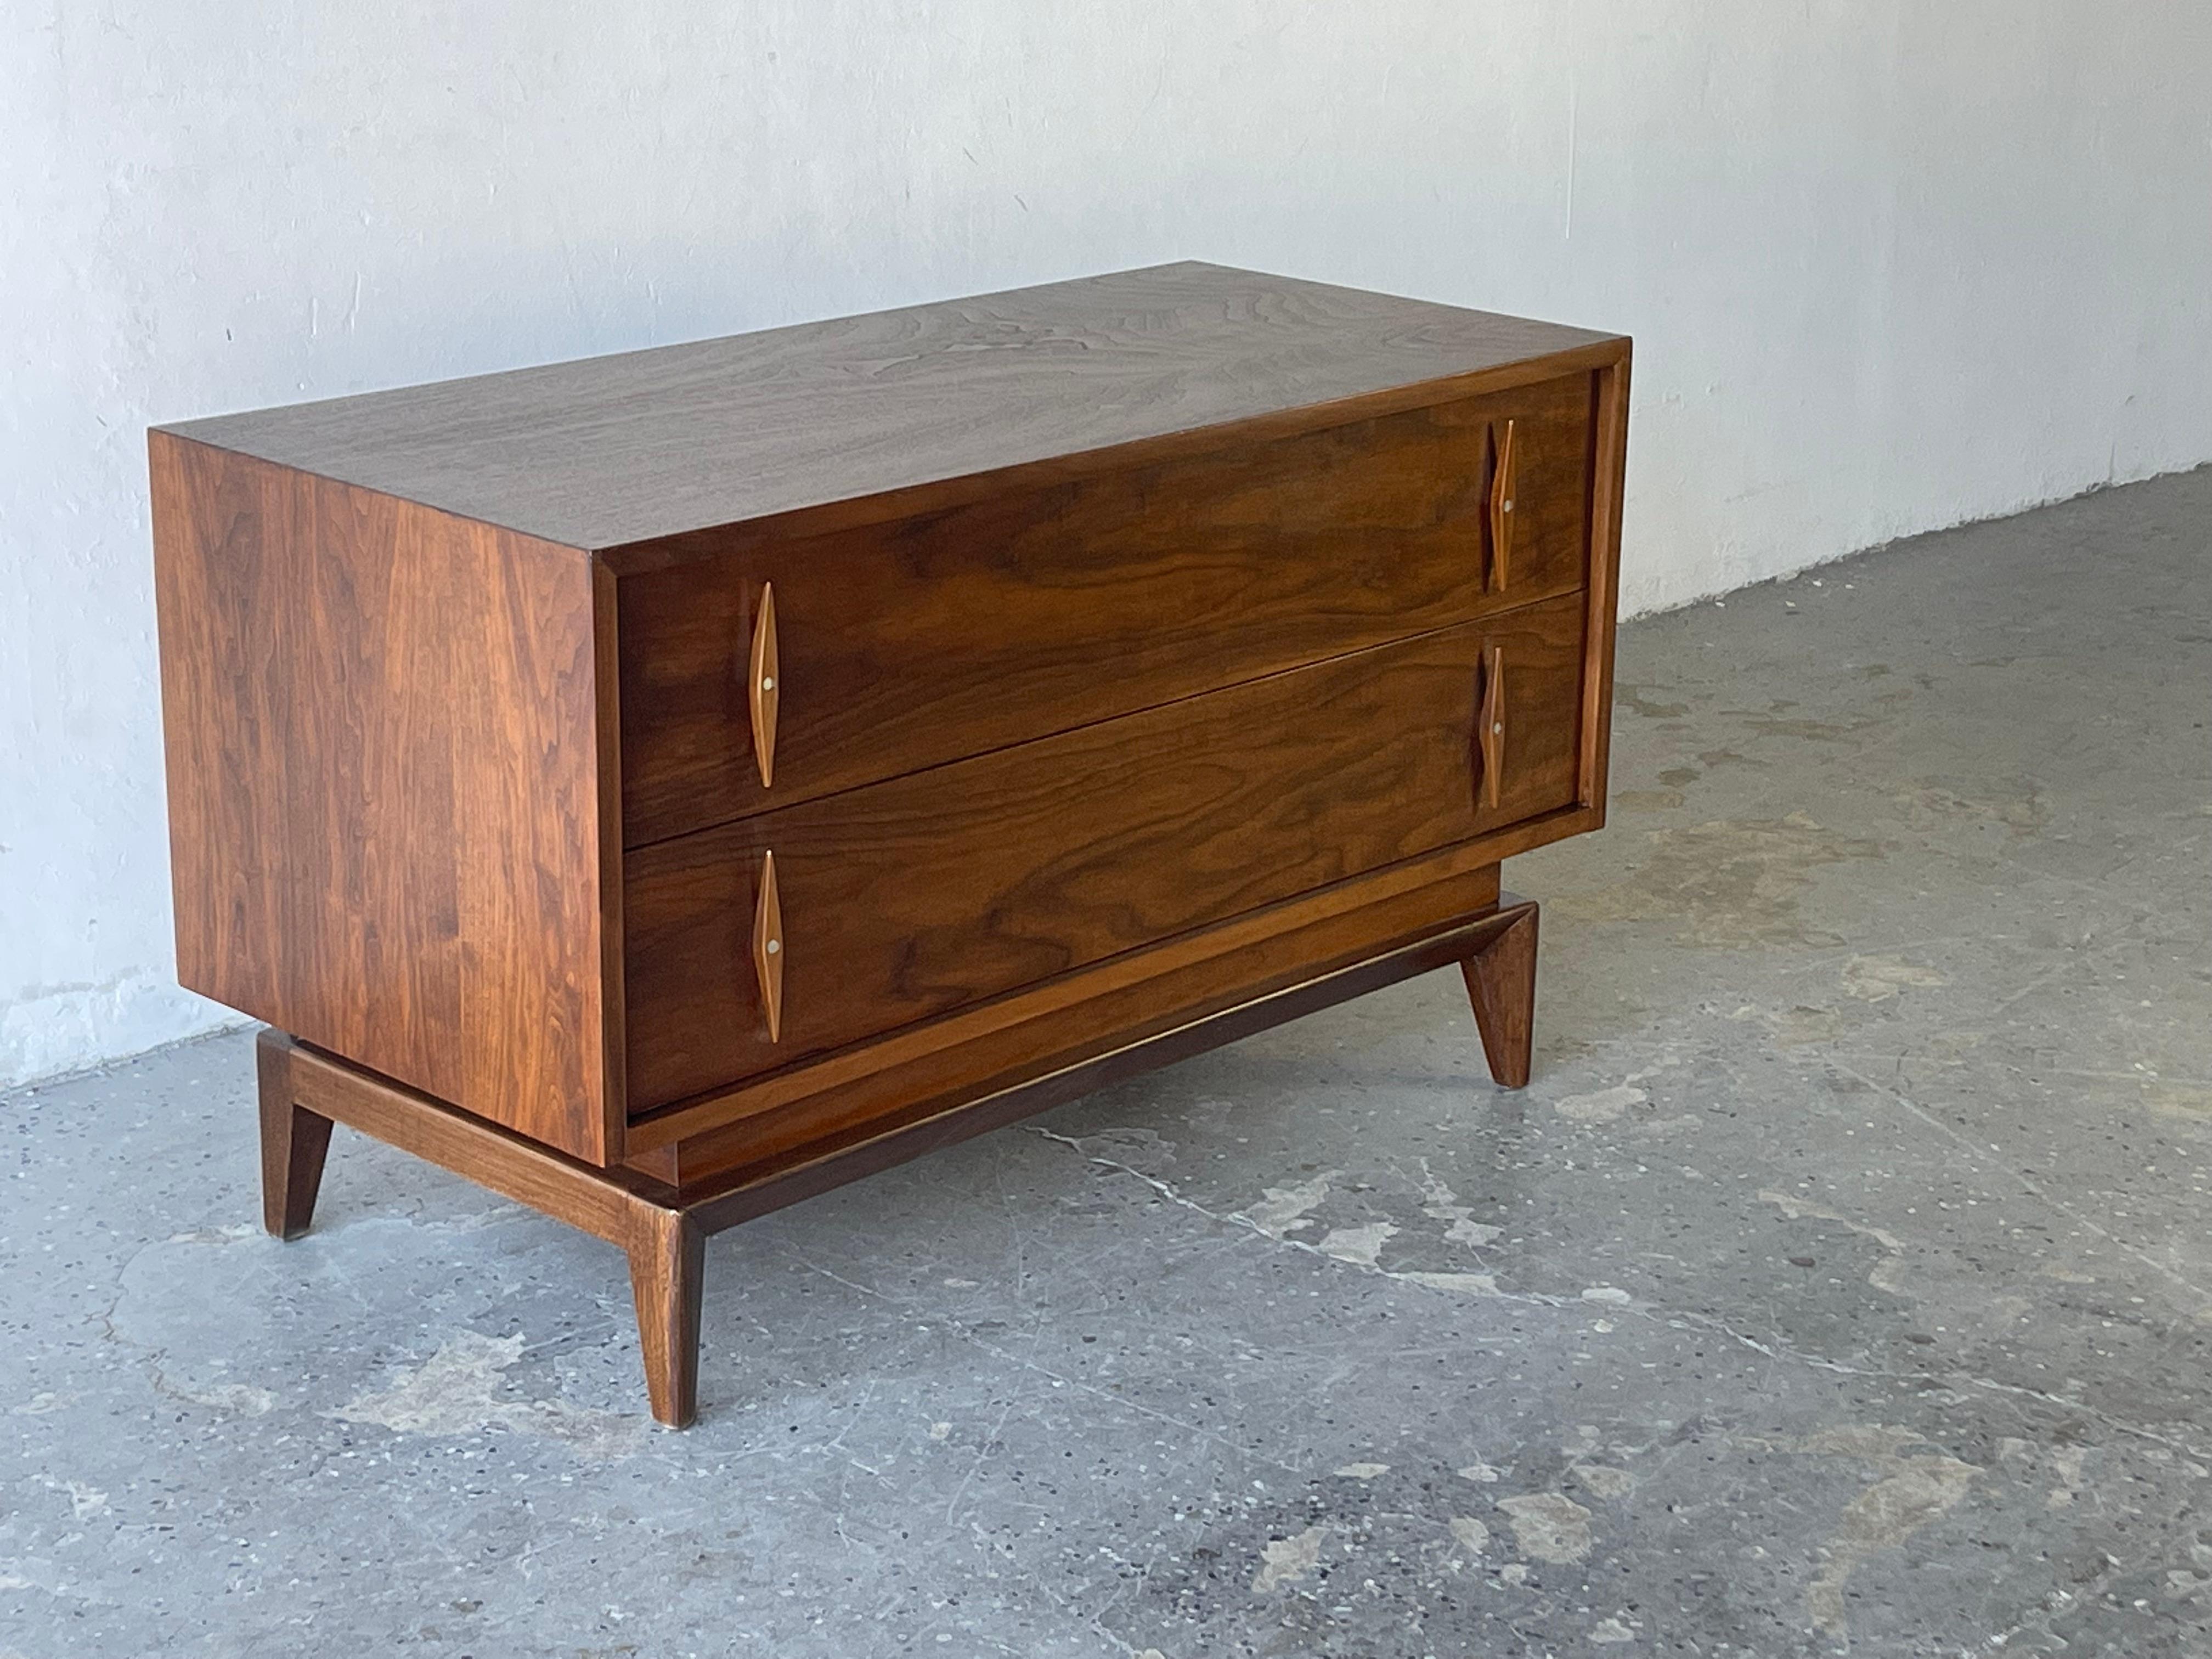 Uber cool Mid-Century Modern small credenza / Media stand by American of Martinsville. This piece has two spacious drawers with wonderful elongated diamond pulls. The walnut wood grain is exquisite from every angle. 

42 in wide 19 in deep 24.75